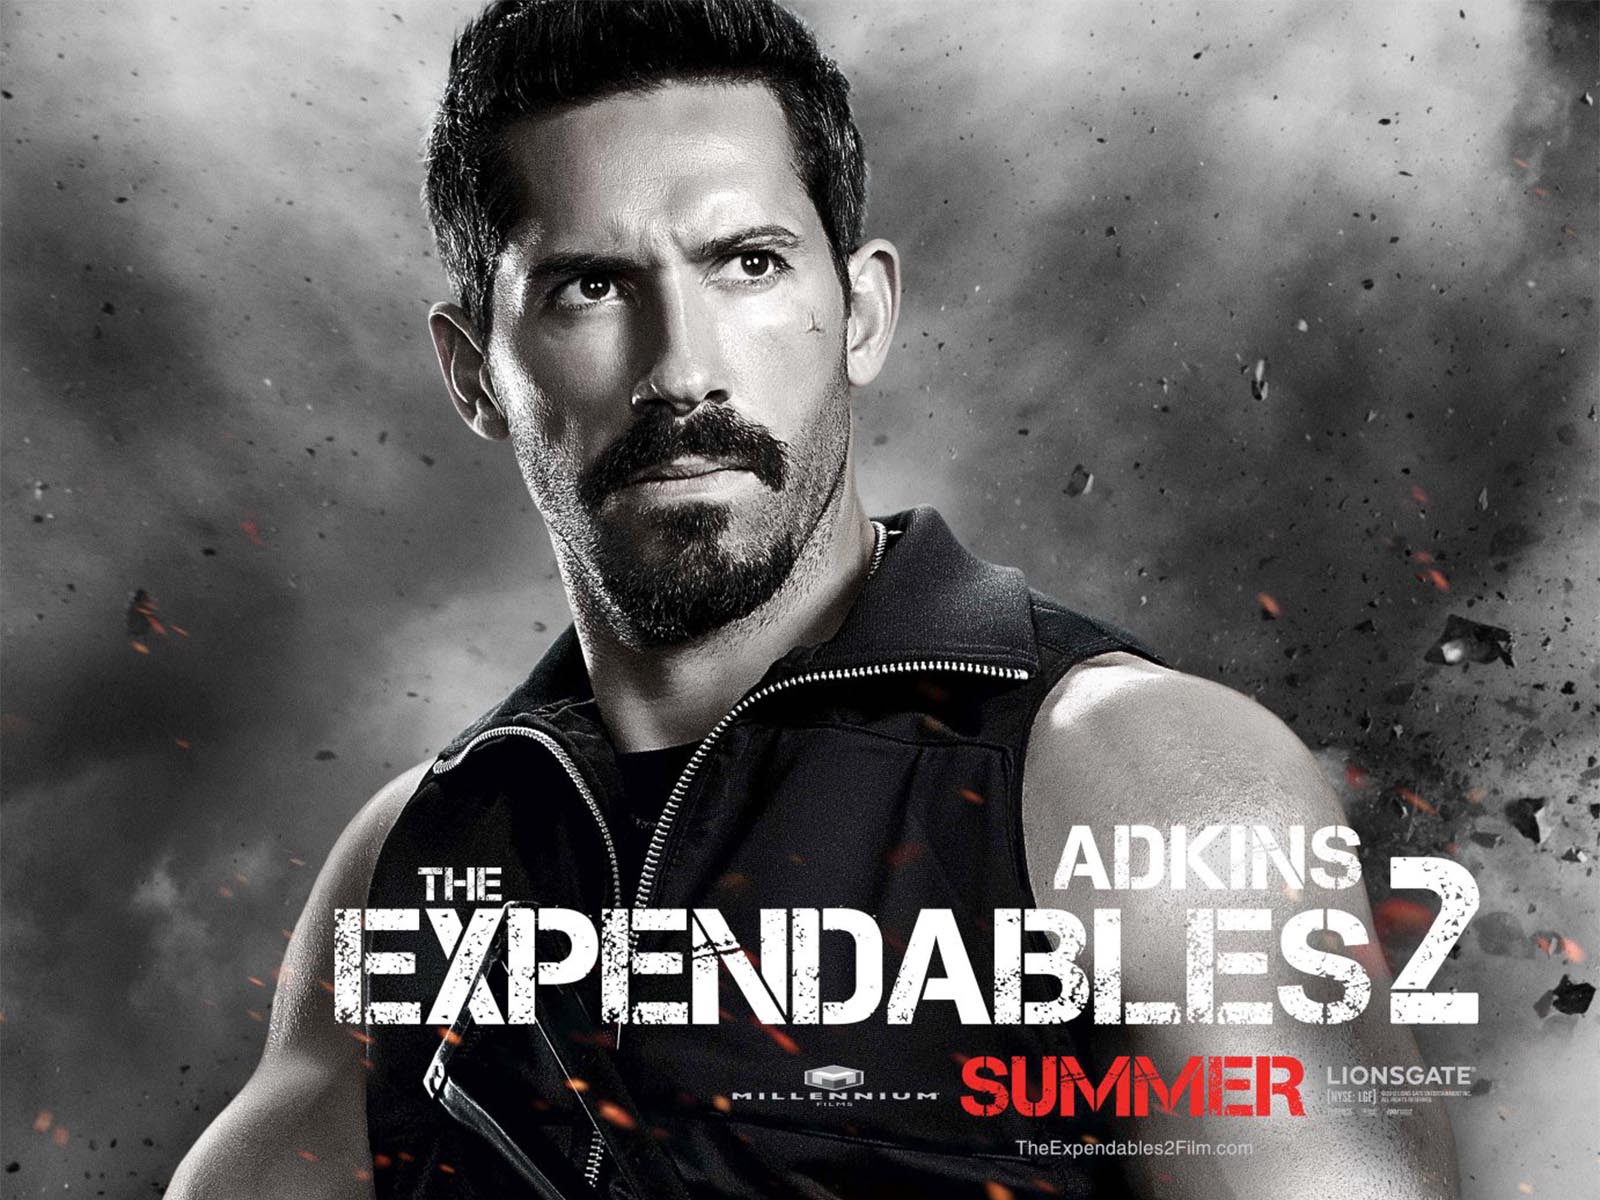 The Expendables - Expendables 2 (2012) - HD Wallpaper 